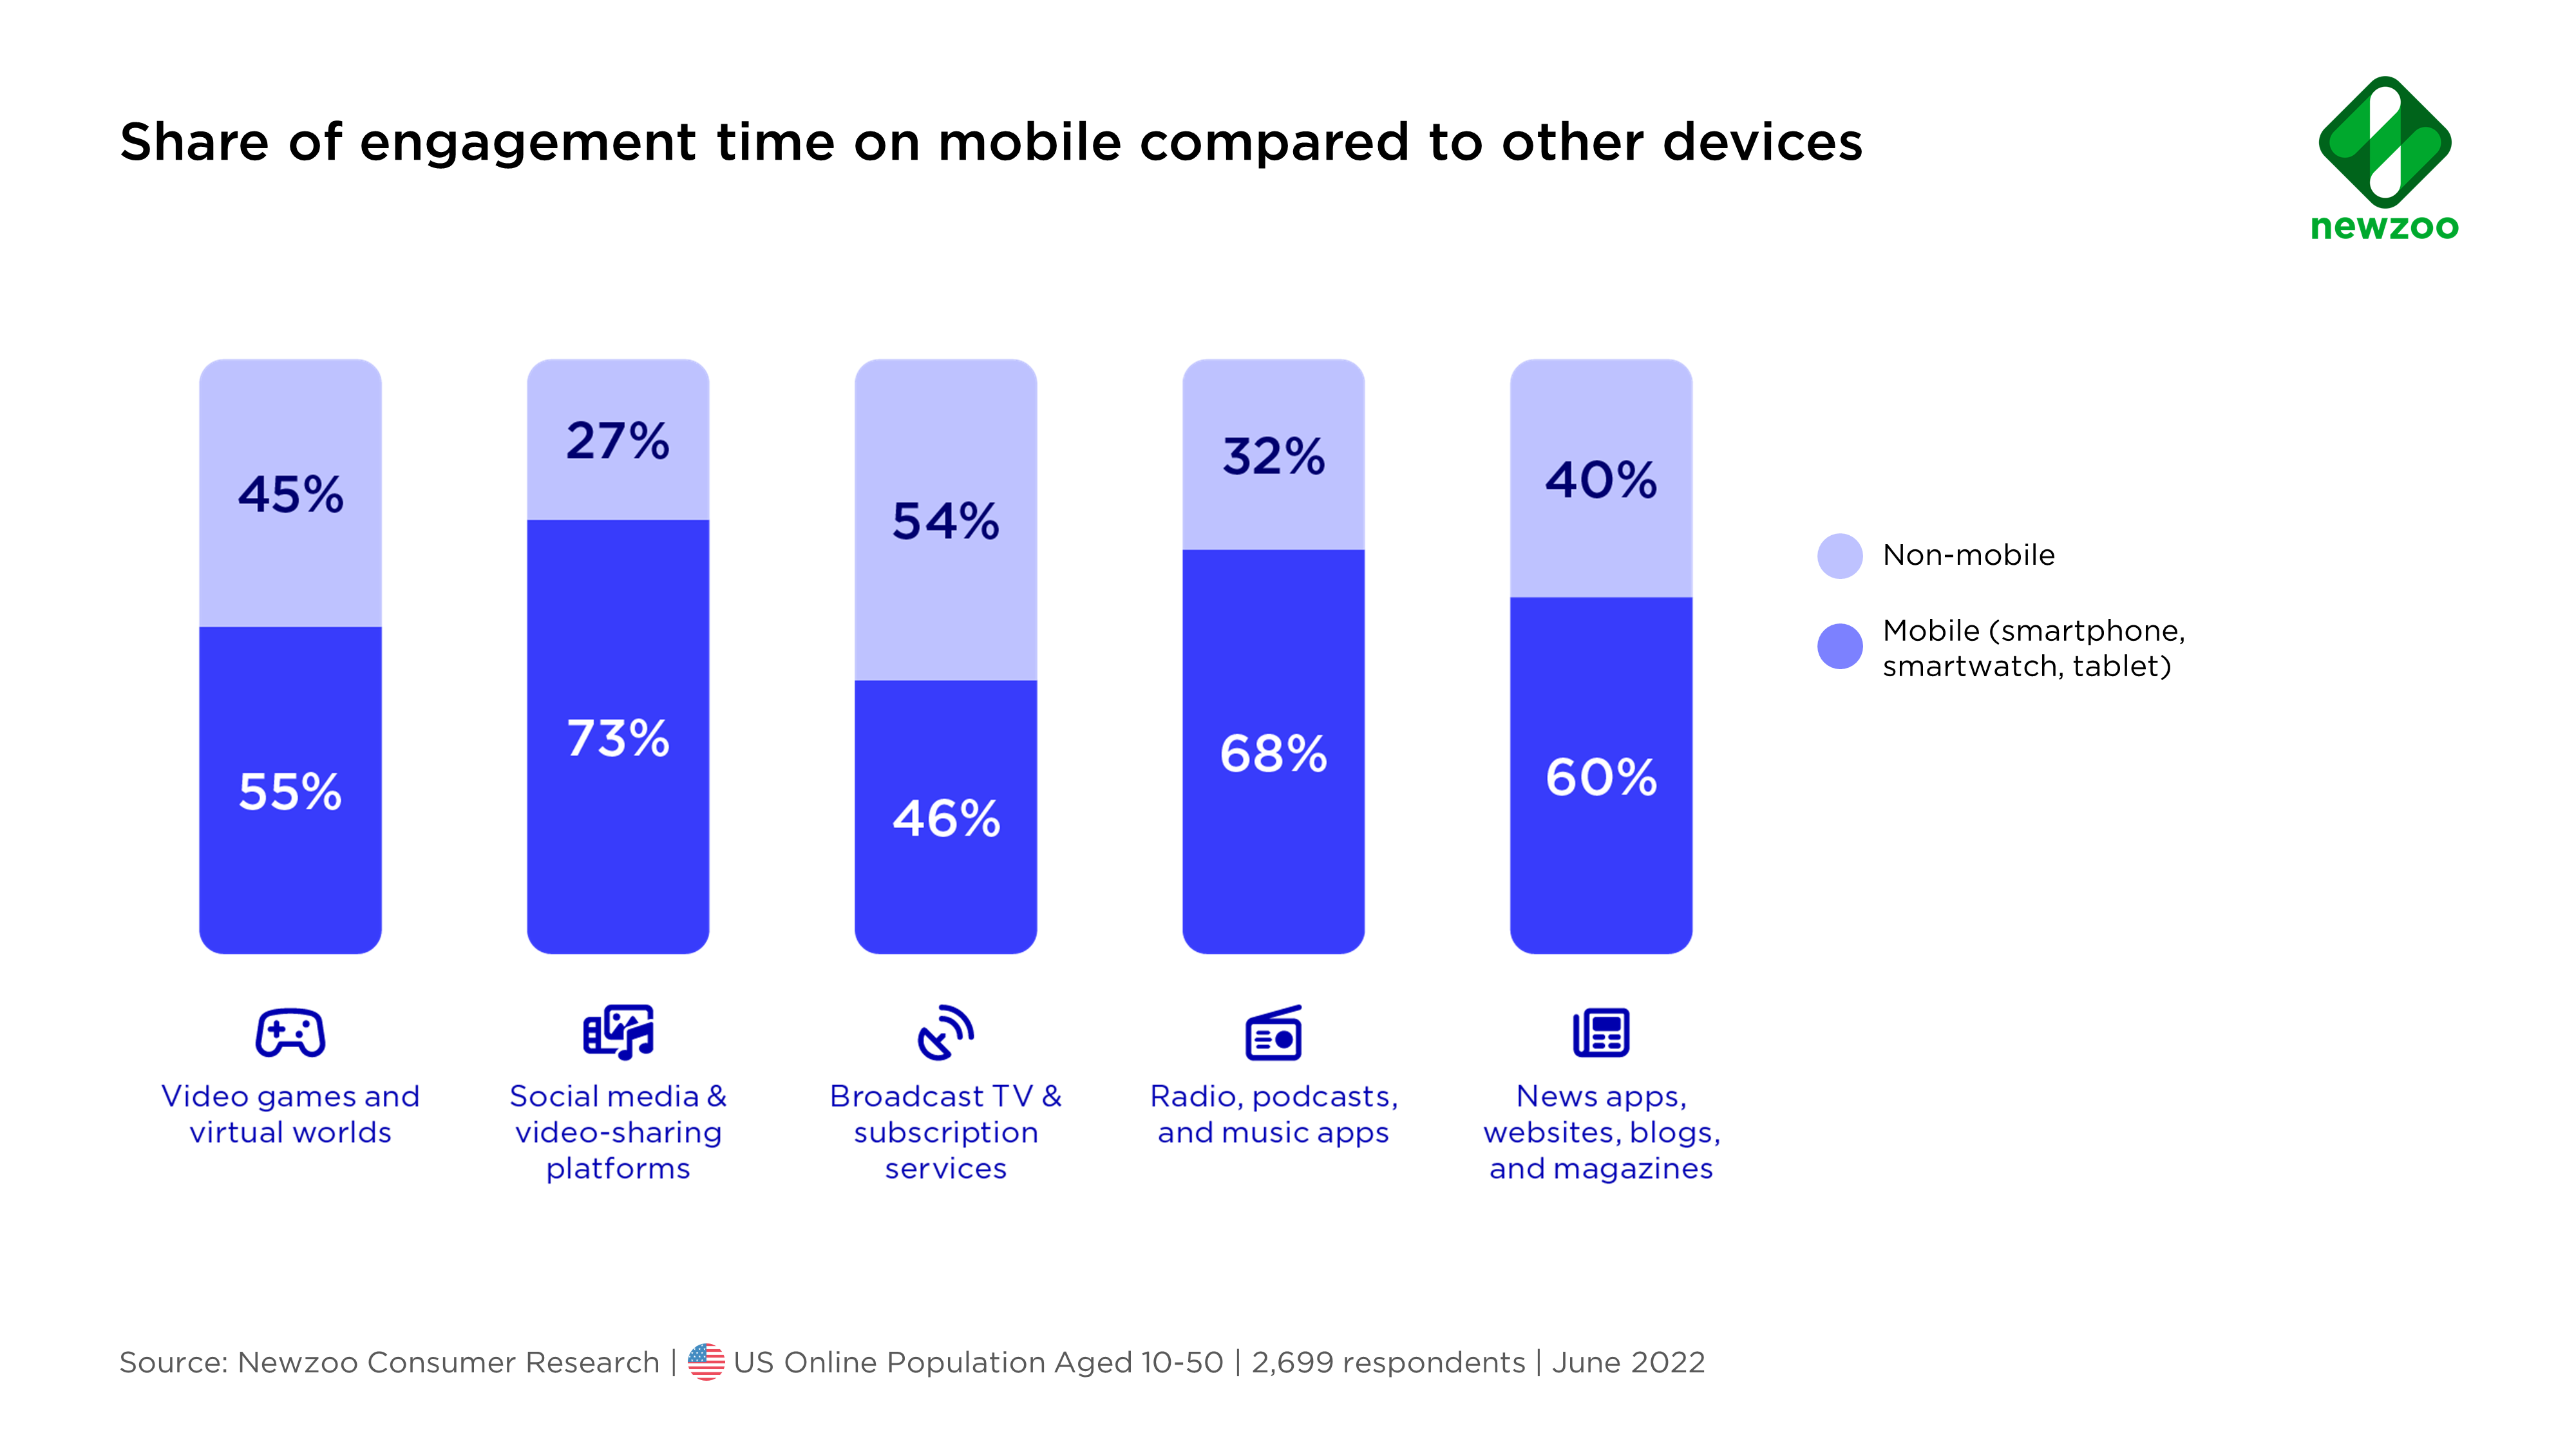 newzoo share of engagement time on mobile compared to other devices